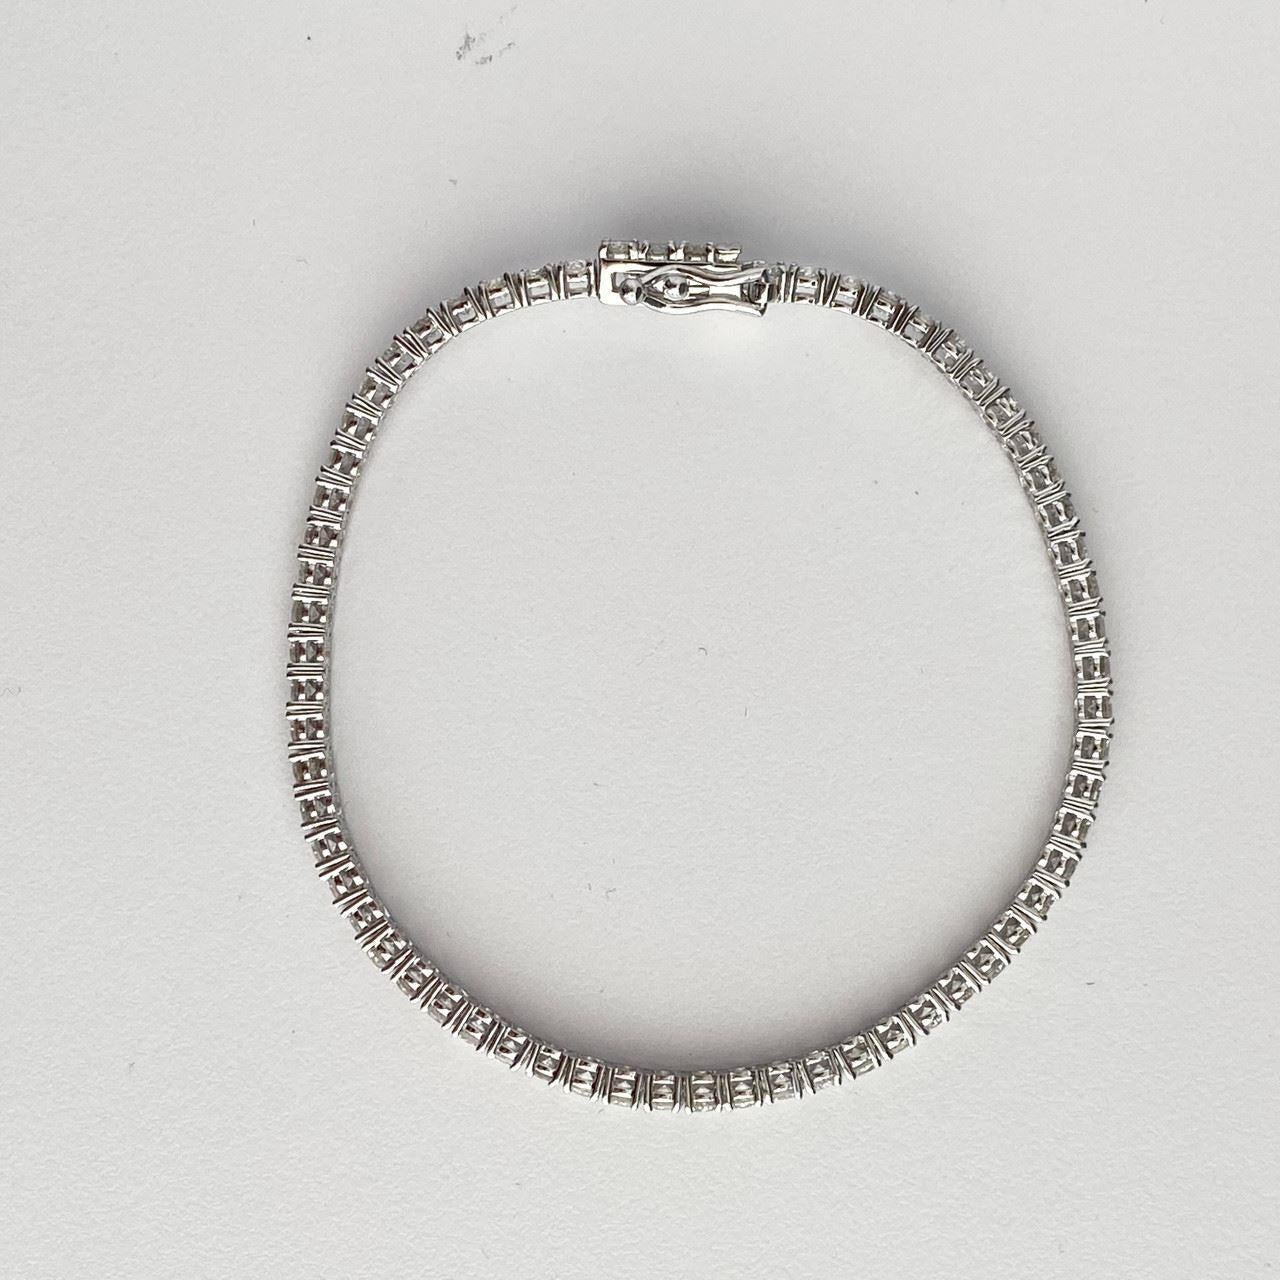 Contemporary 14k White Gold Diamond Tennis Bracelet Weighing 4.25ctw For Sale